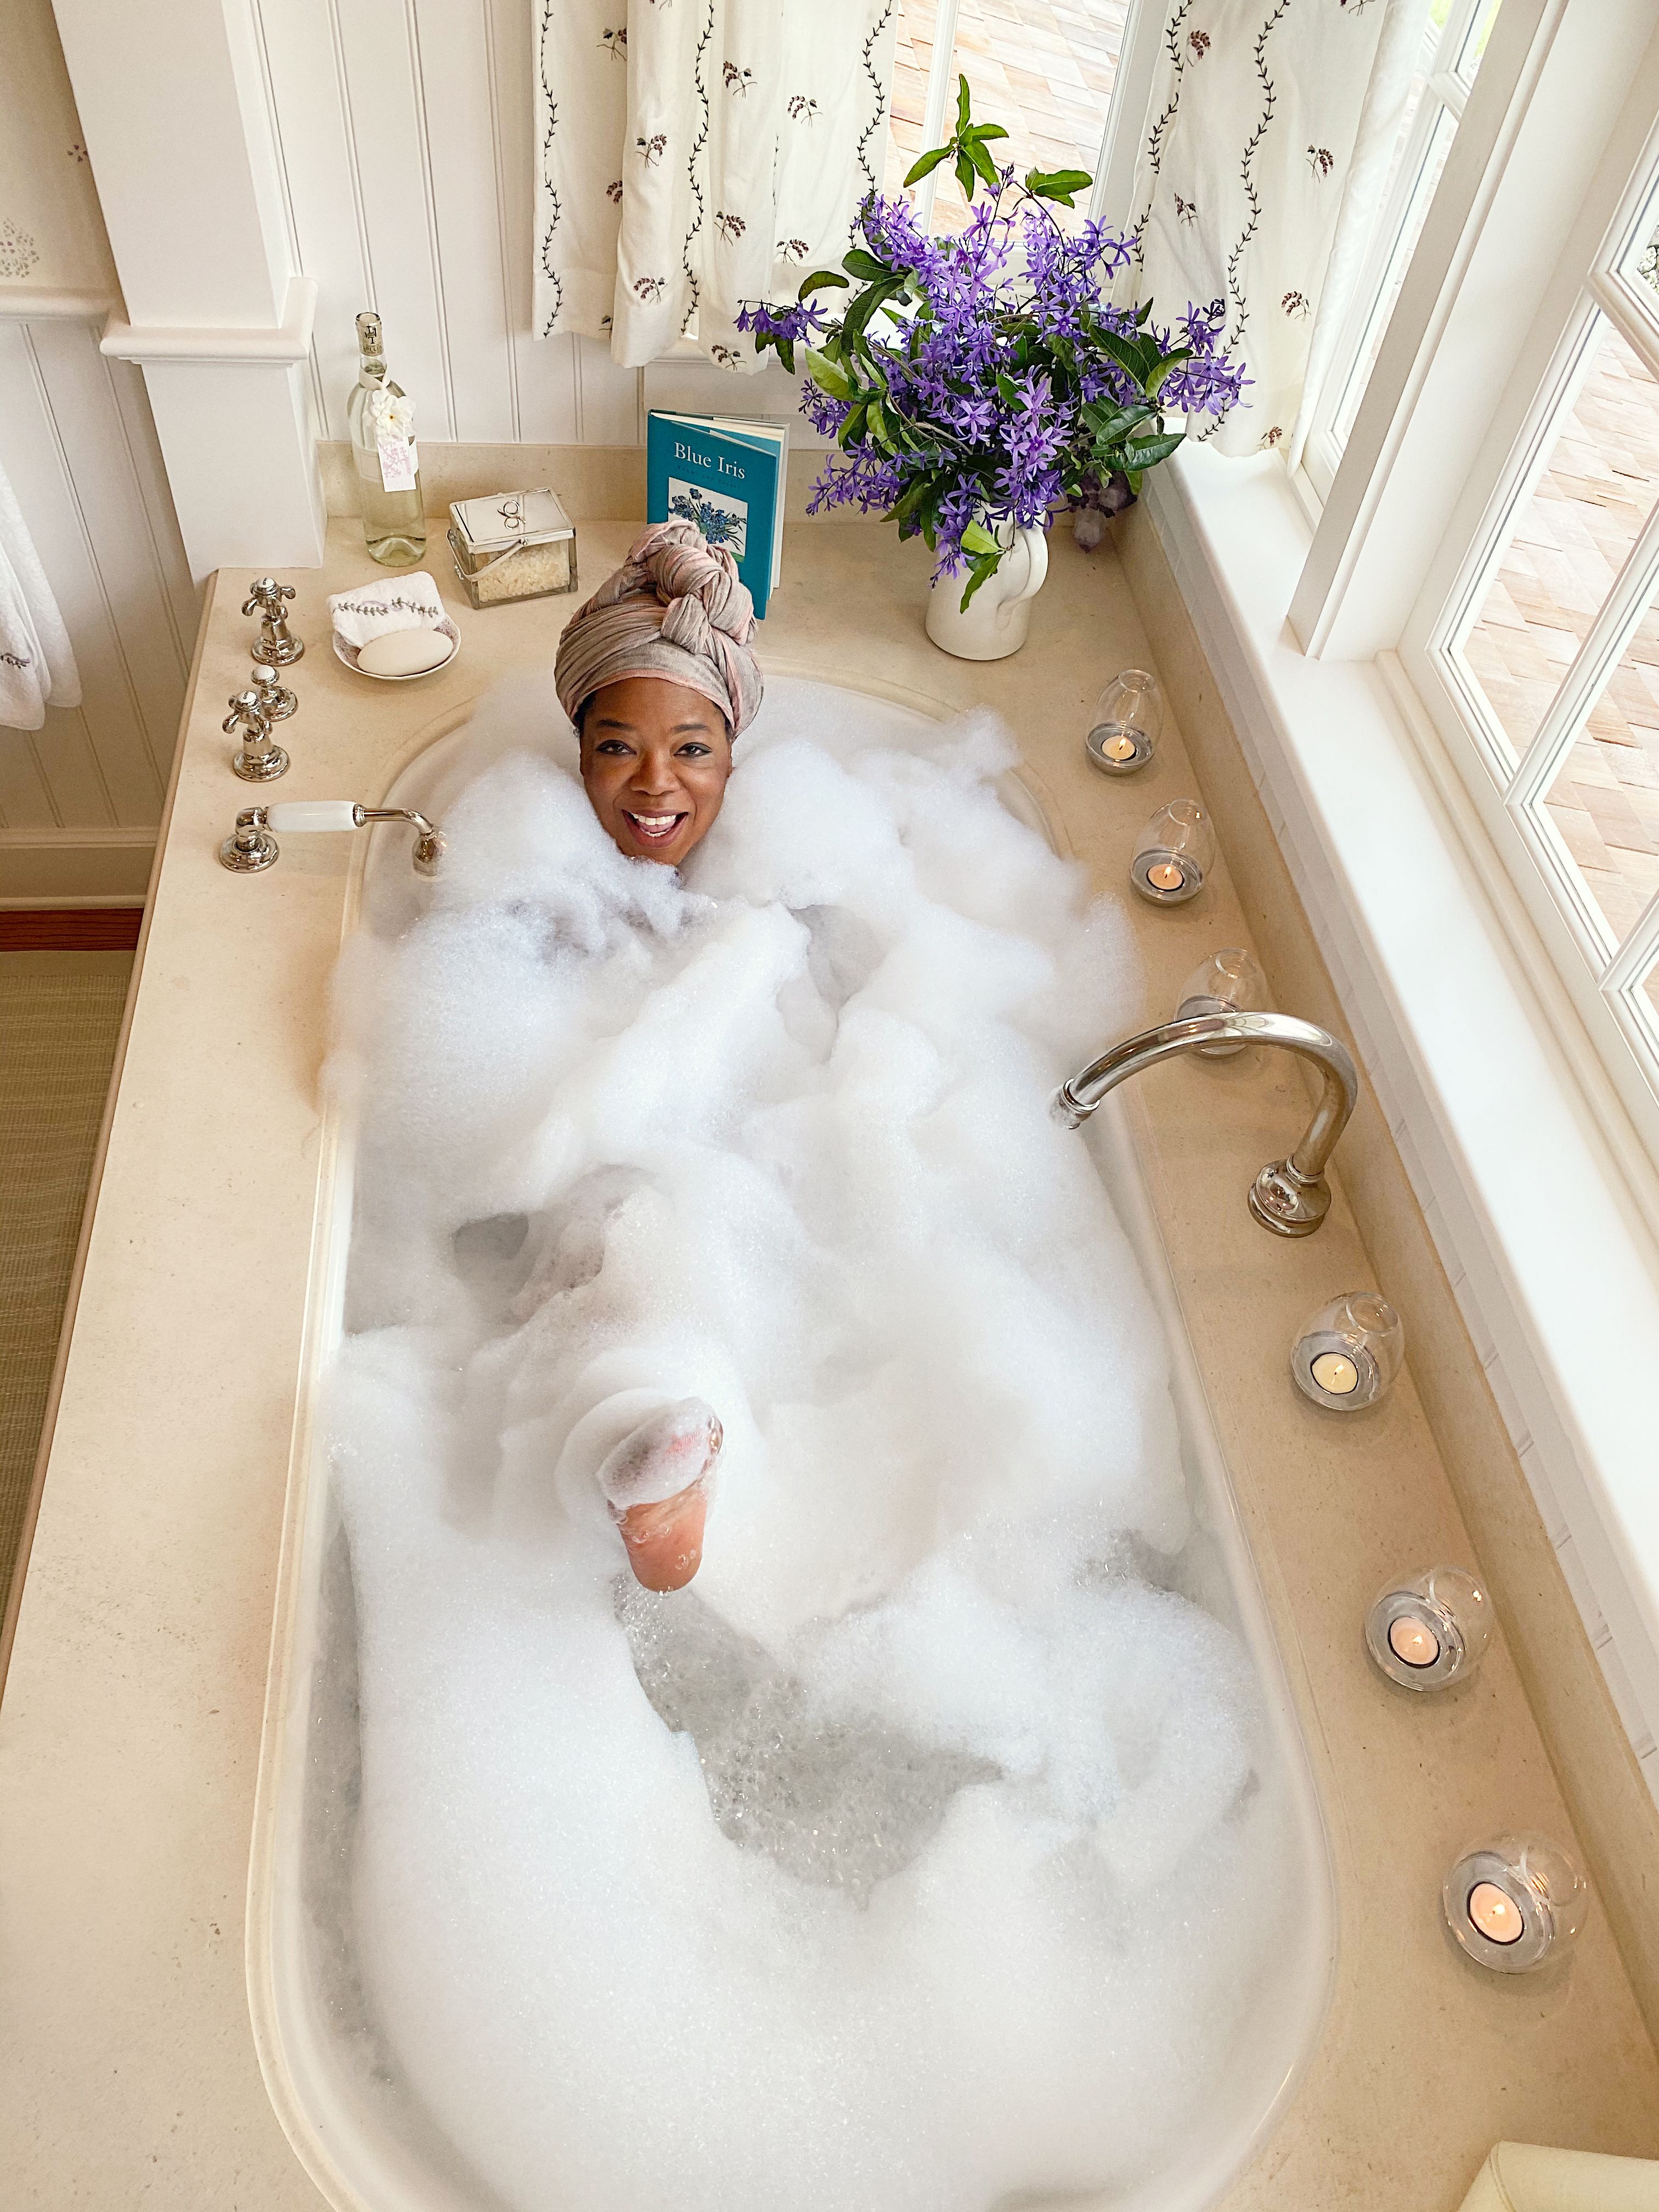 Oprah Reveals Her Bath Routine In, How Much Does It Cost To Fill A Bathtub